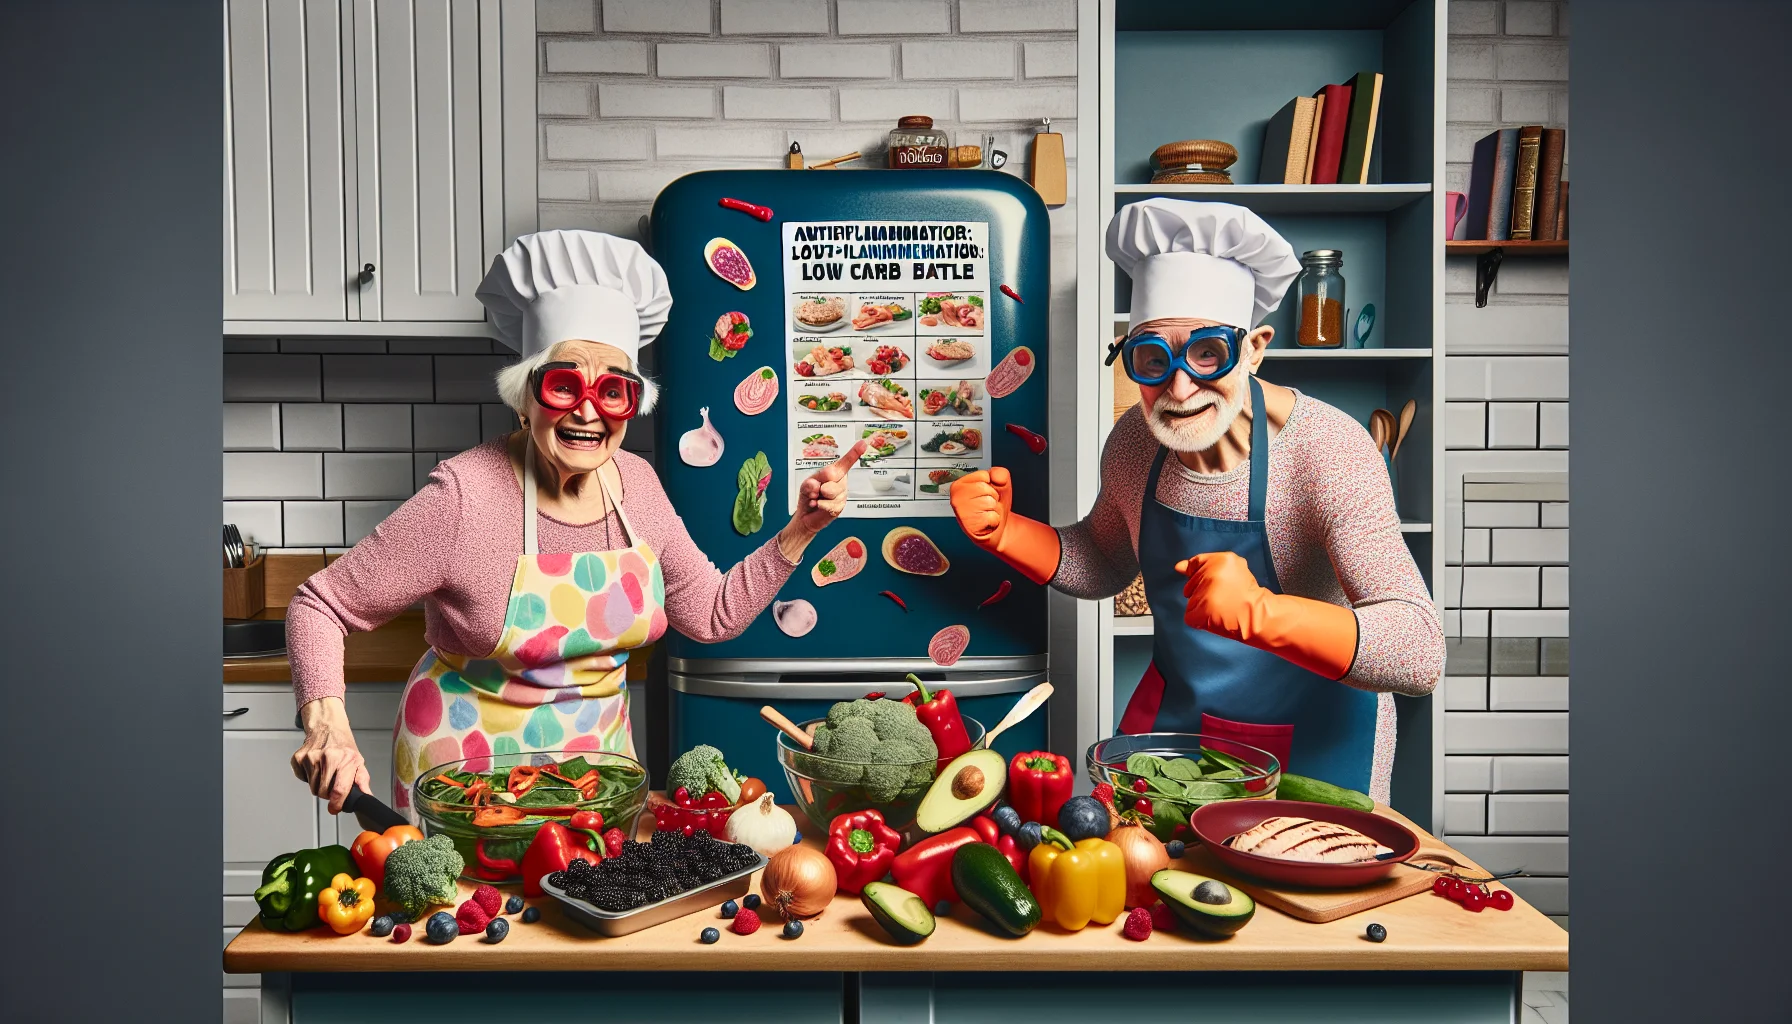 Create a humorous and realistic image denoting seniors' endeavours with anti-inflammatory low-carb diets. Imagine a scenario featuring a modern, well-equipped kitchen. Two elderly individuals, a Middle-Eastern woman and a Caucasian man, are playfully engaged in a cooking duel. They are energetically preparing colourful low-carb meals; bell peppers, avocado, spinach, grilled chicken, and bowls of mixed berries are scattered around them. Both are wearing hilarious attire - oversized chef hats, bright aprons, and safety goggles for chopping onions. Pinned to the fridge is a big magnetized chart, humorously titled 'Elders vs. Inflammation: The Low Carb Battle'.